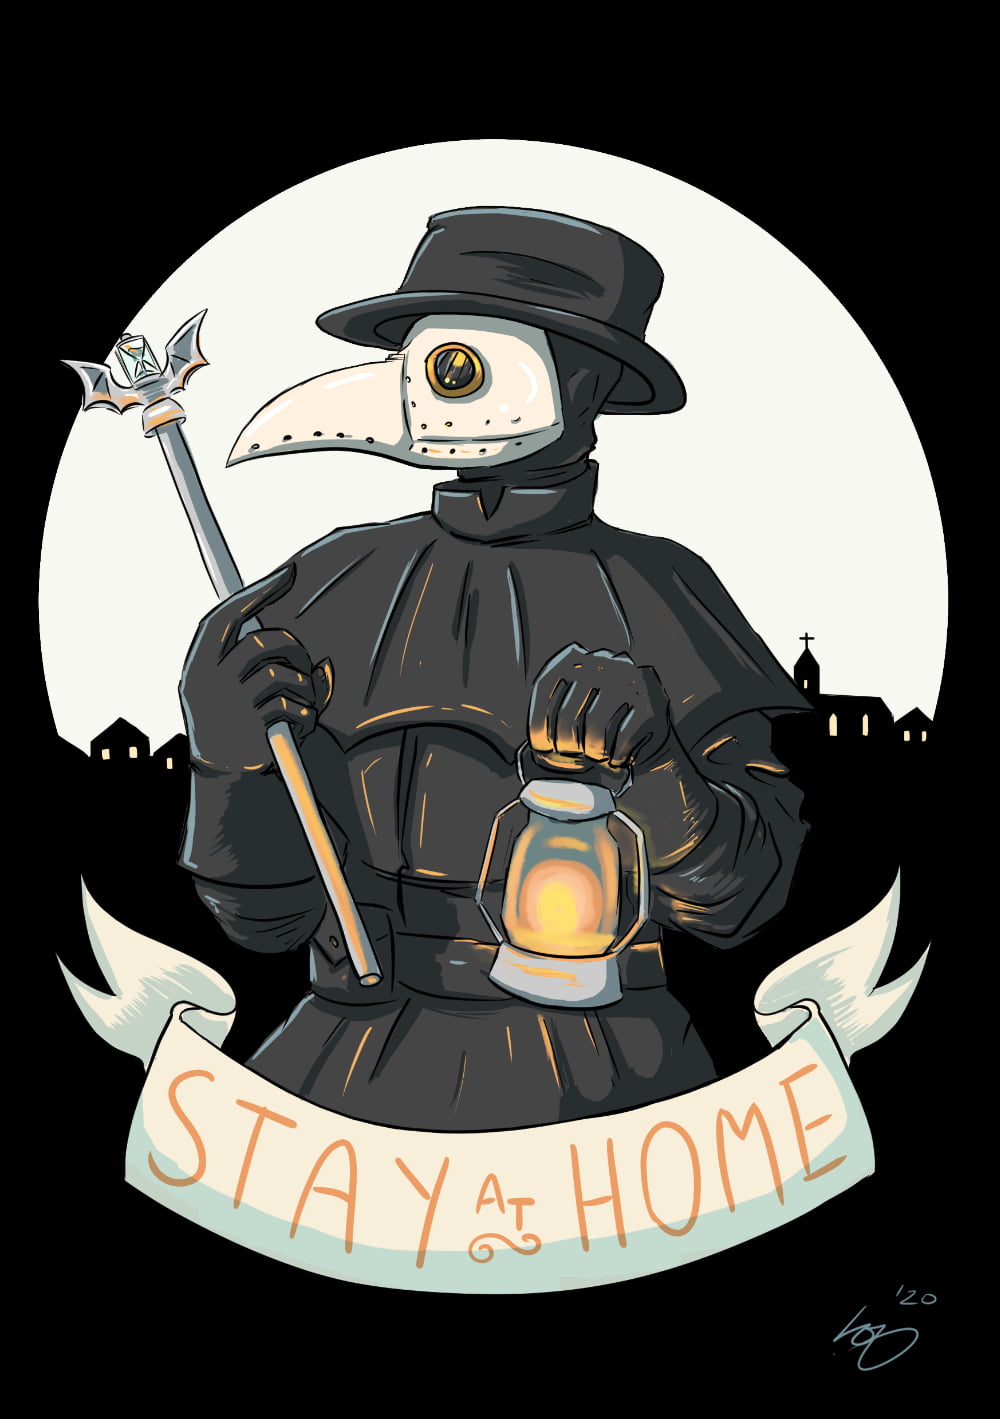 Illustration of a plague doctor carrying a sceptre and lamp, before silhouettes of a moonlit village. Below him is a banner that reads STAY AT HOME